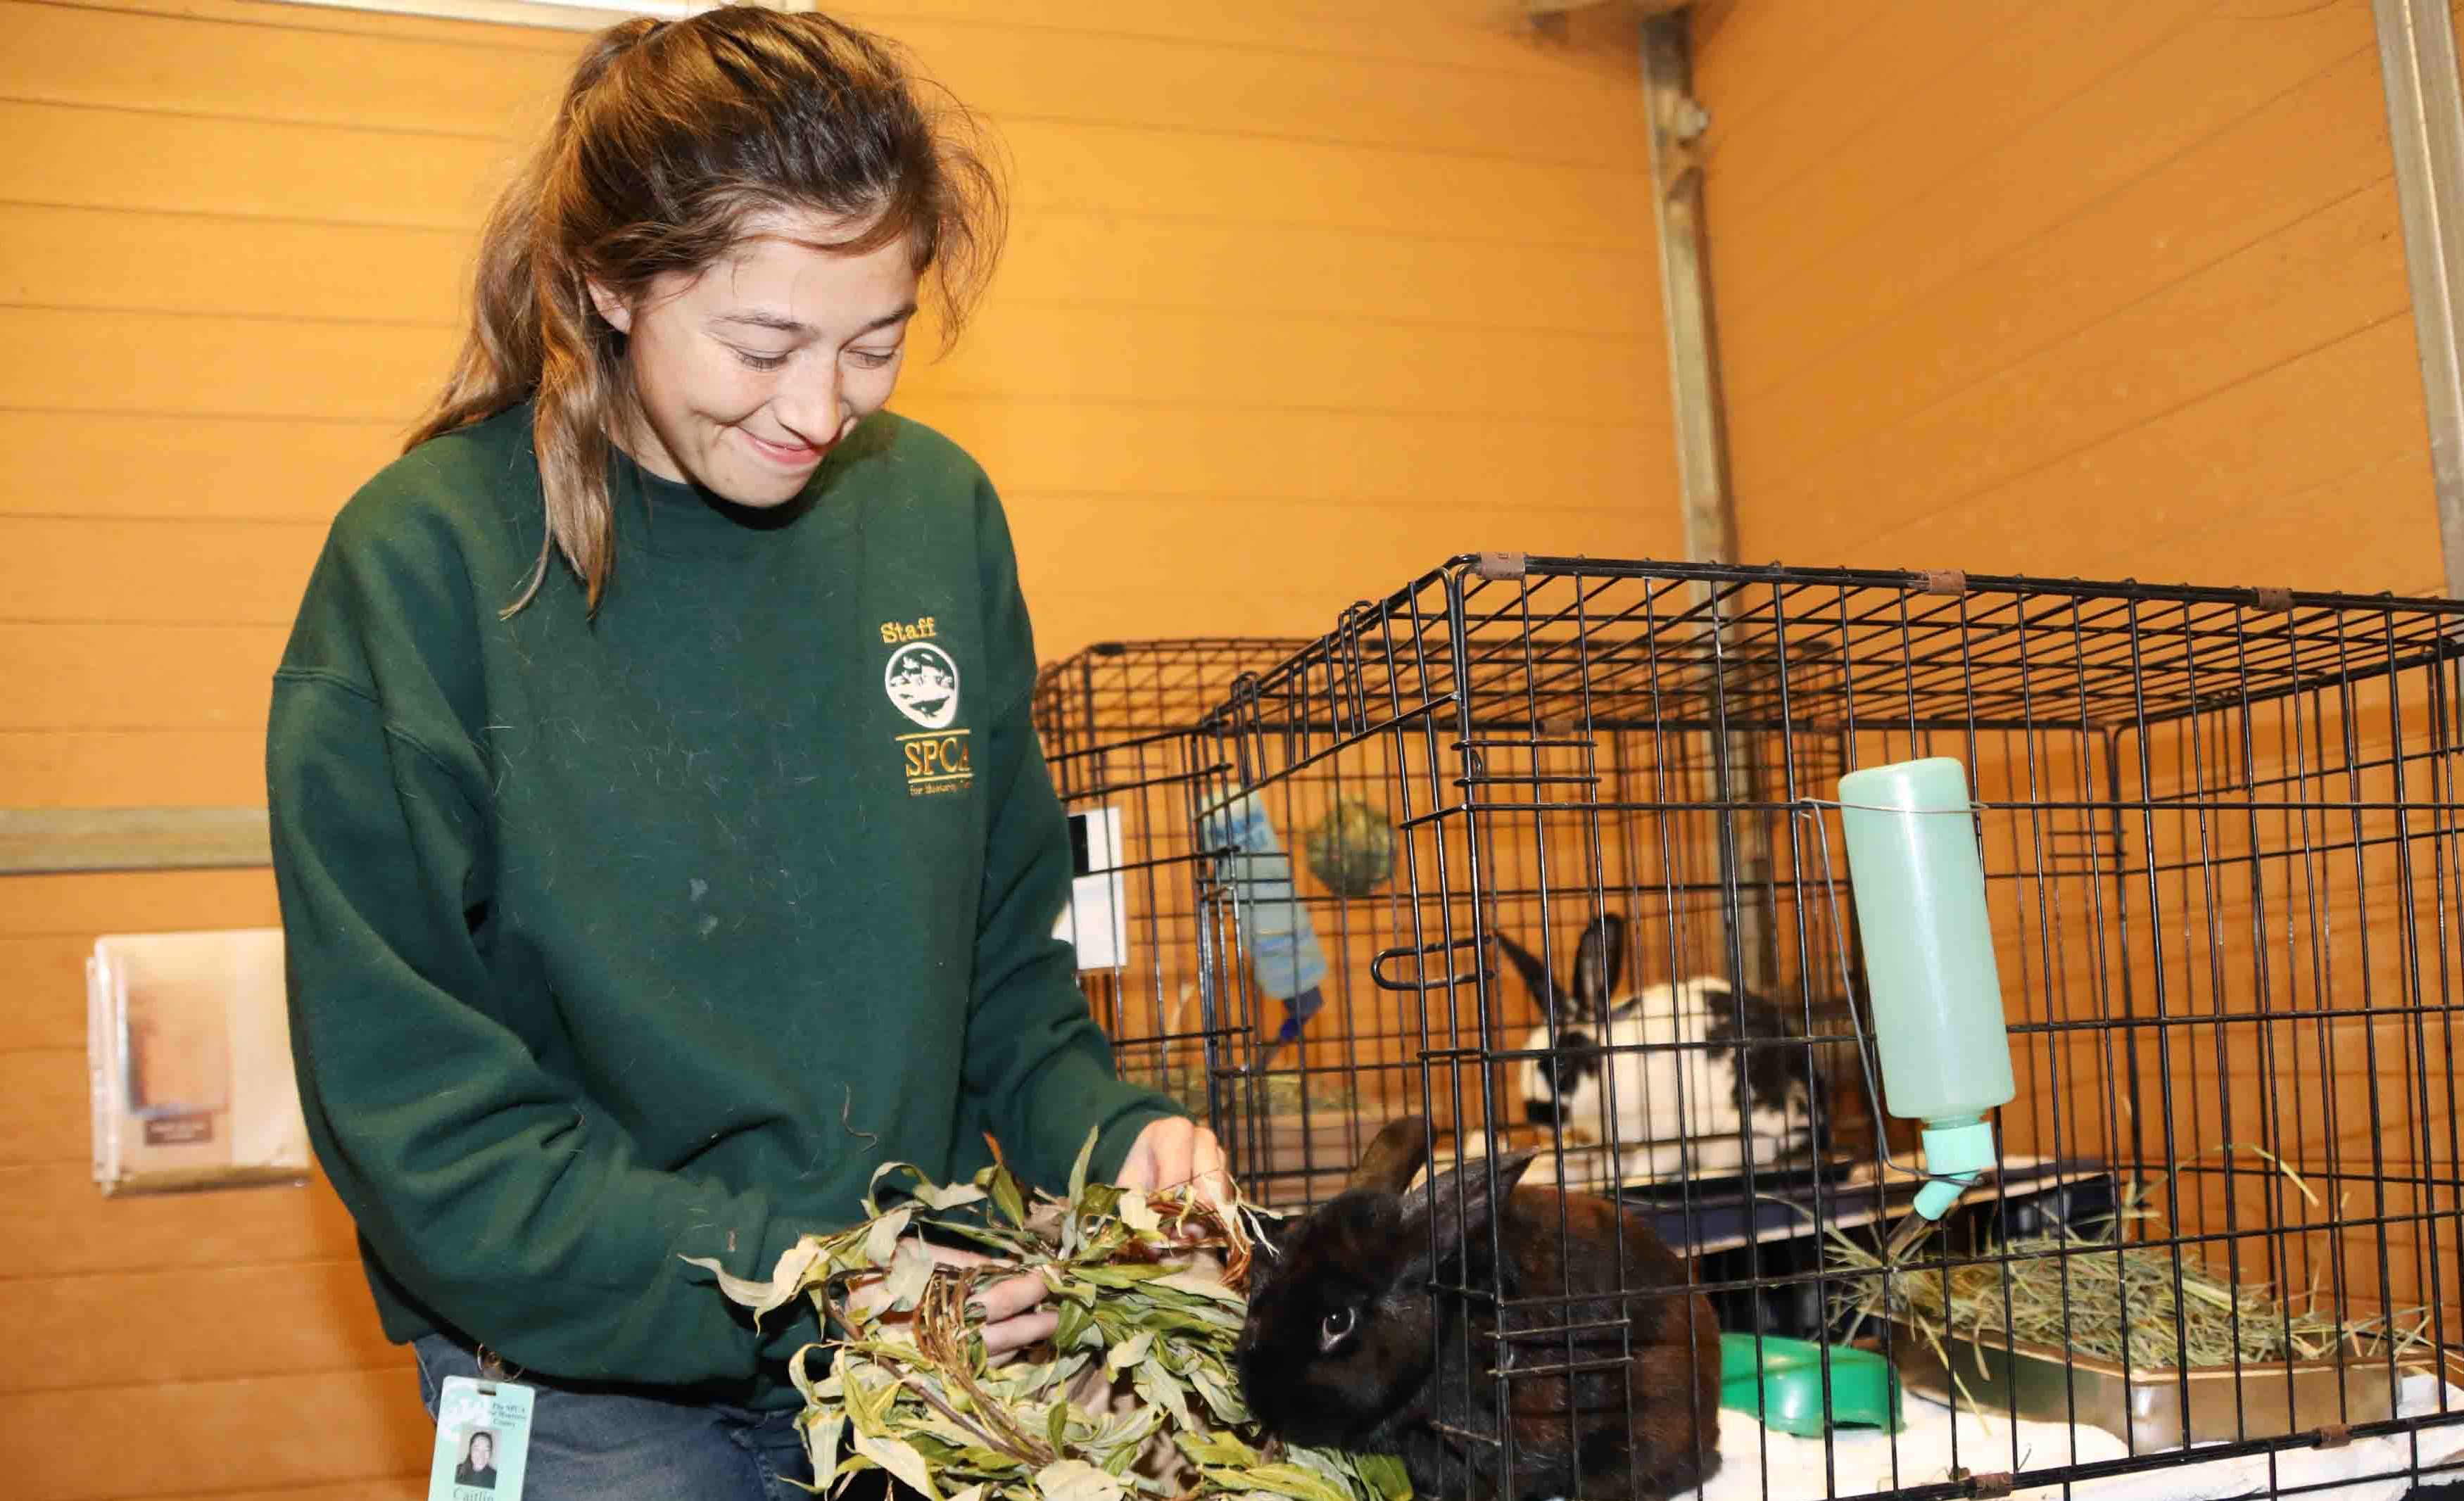 Caitlin gives a willow wreath to one of the bunnies at the Monterey SPCA.